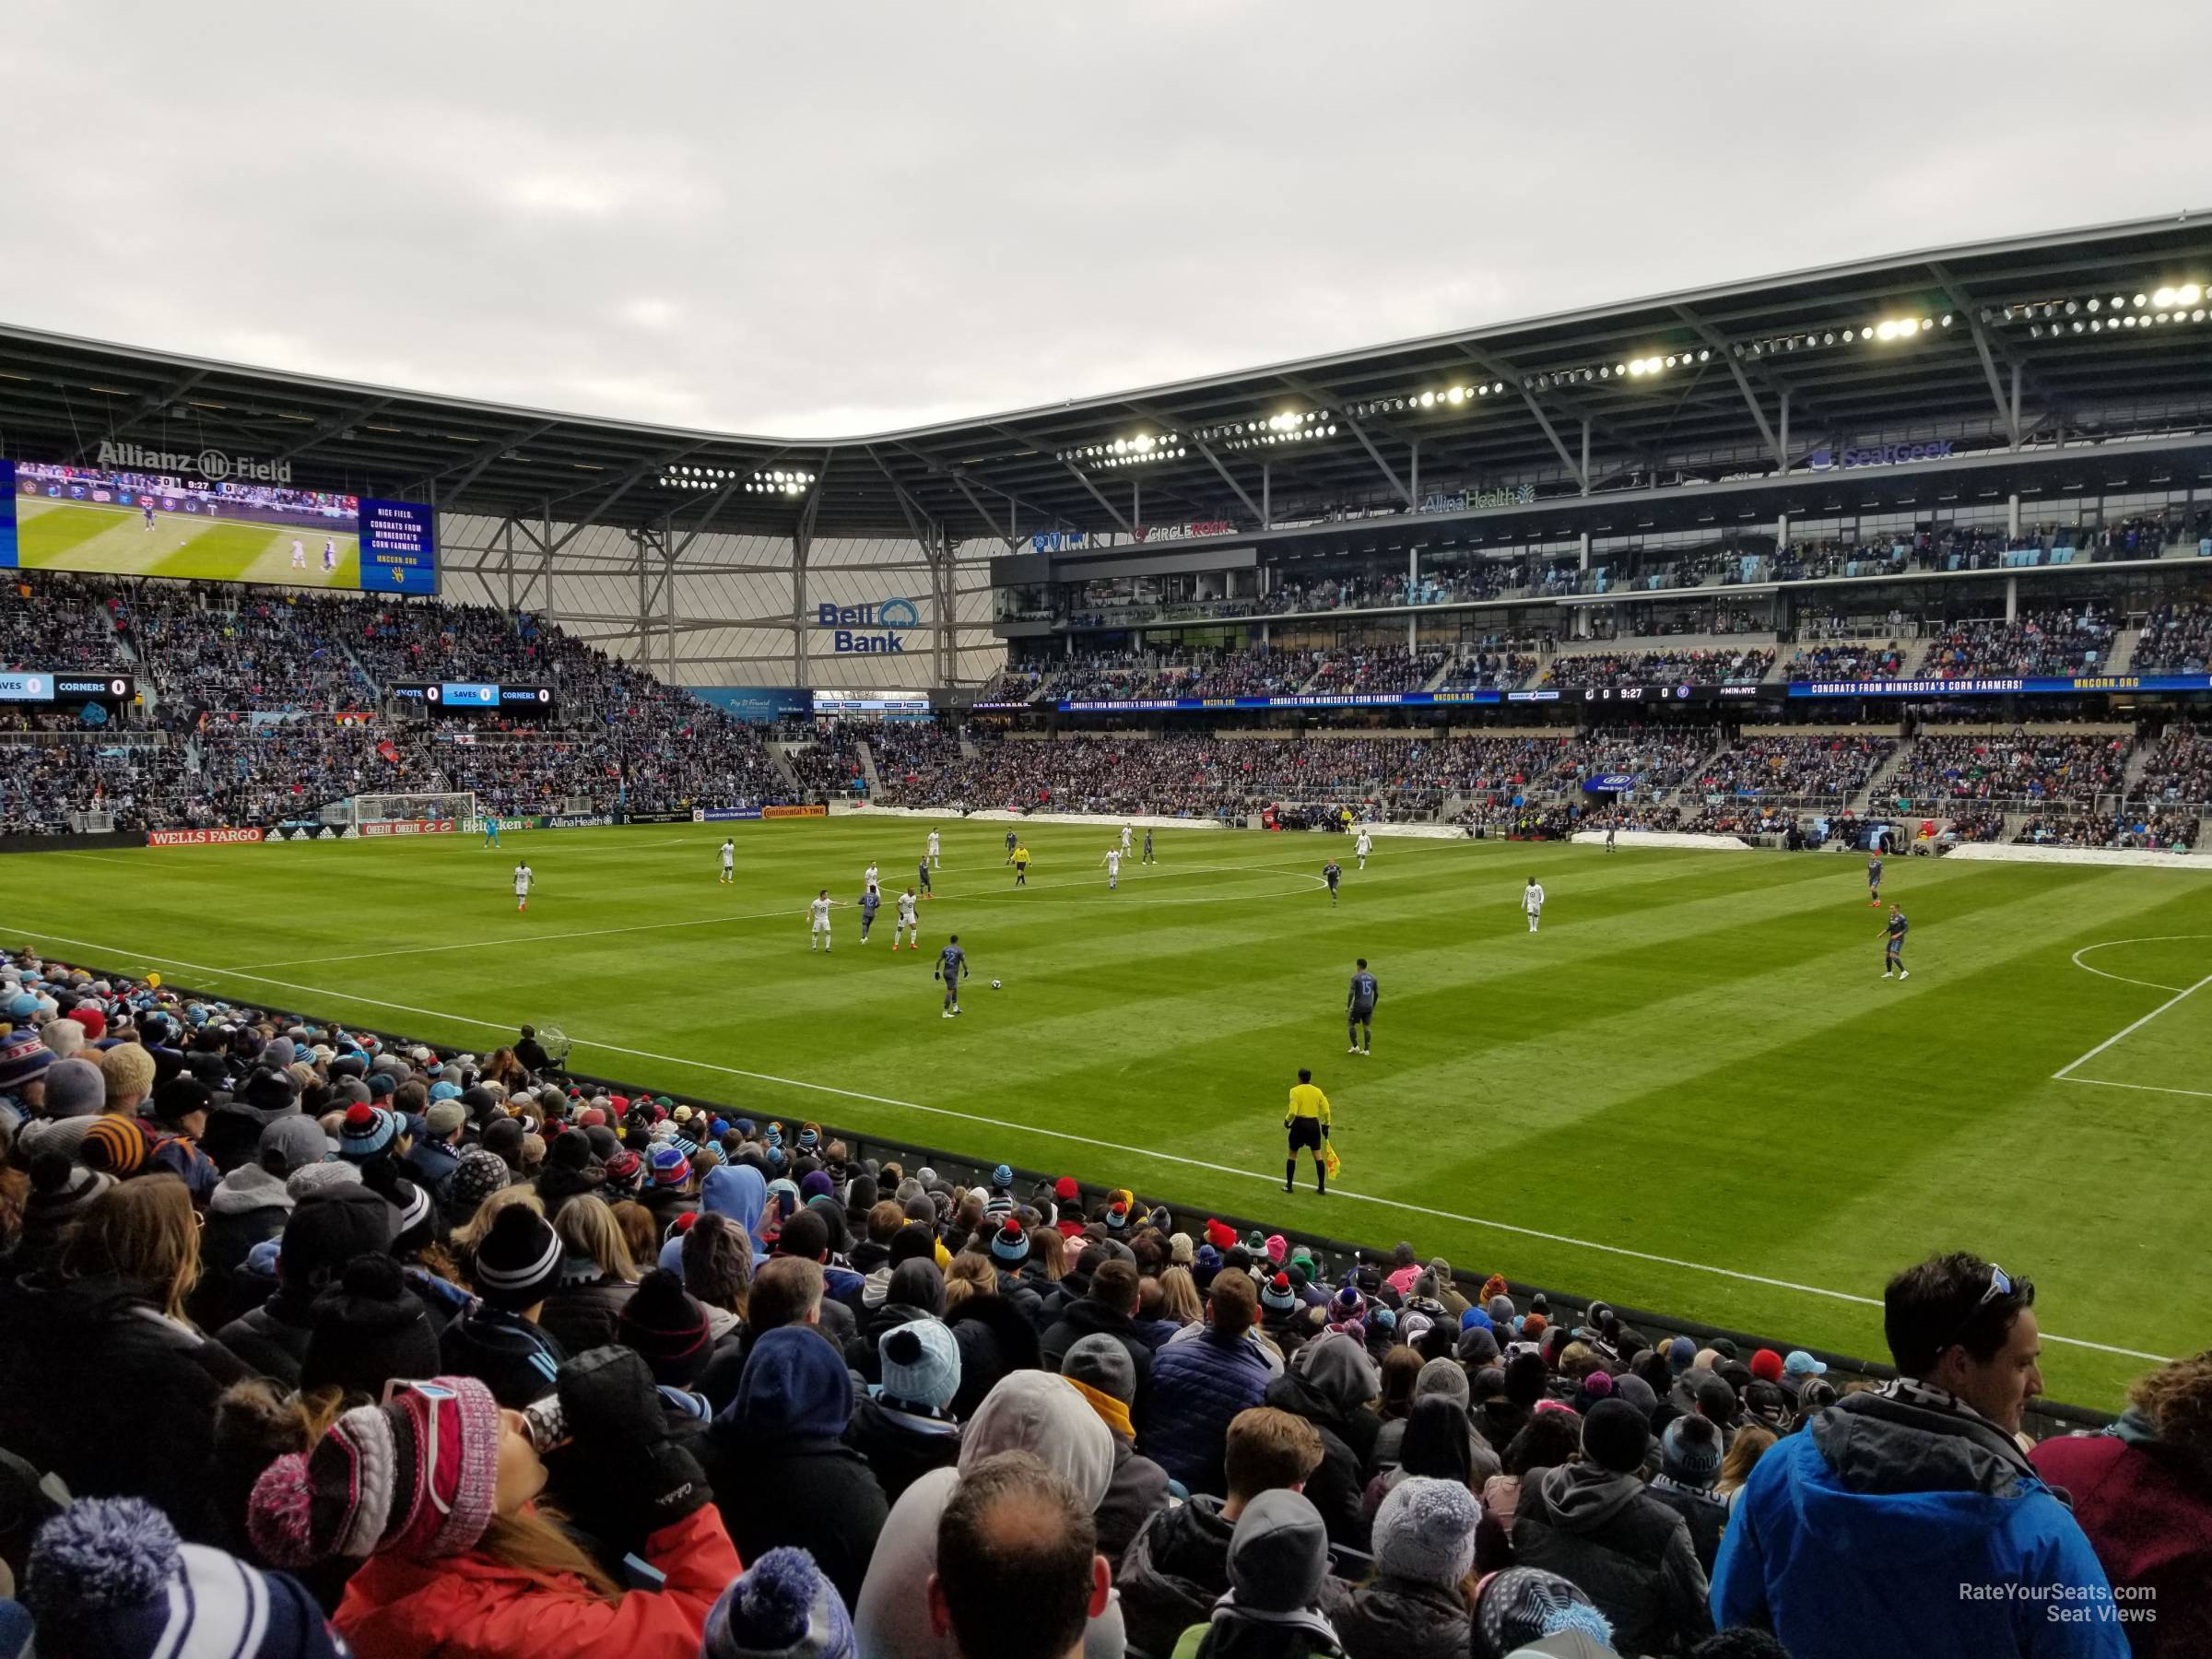 section 10, row 18 seat view  - allianz field